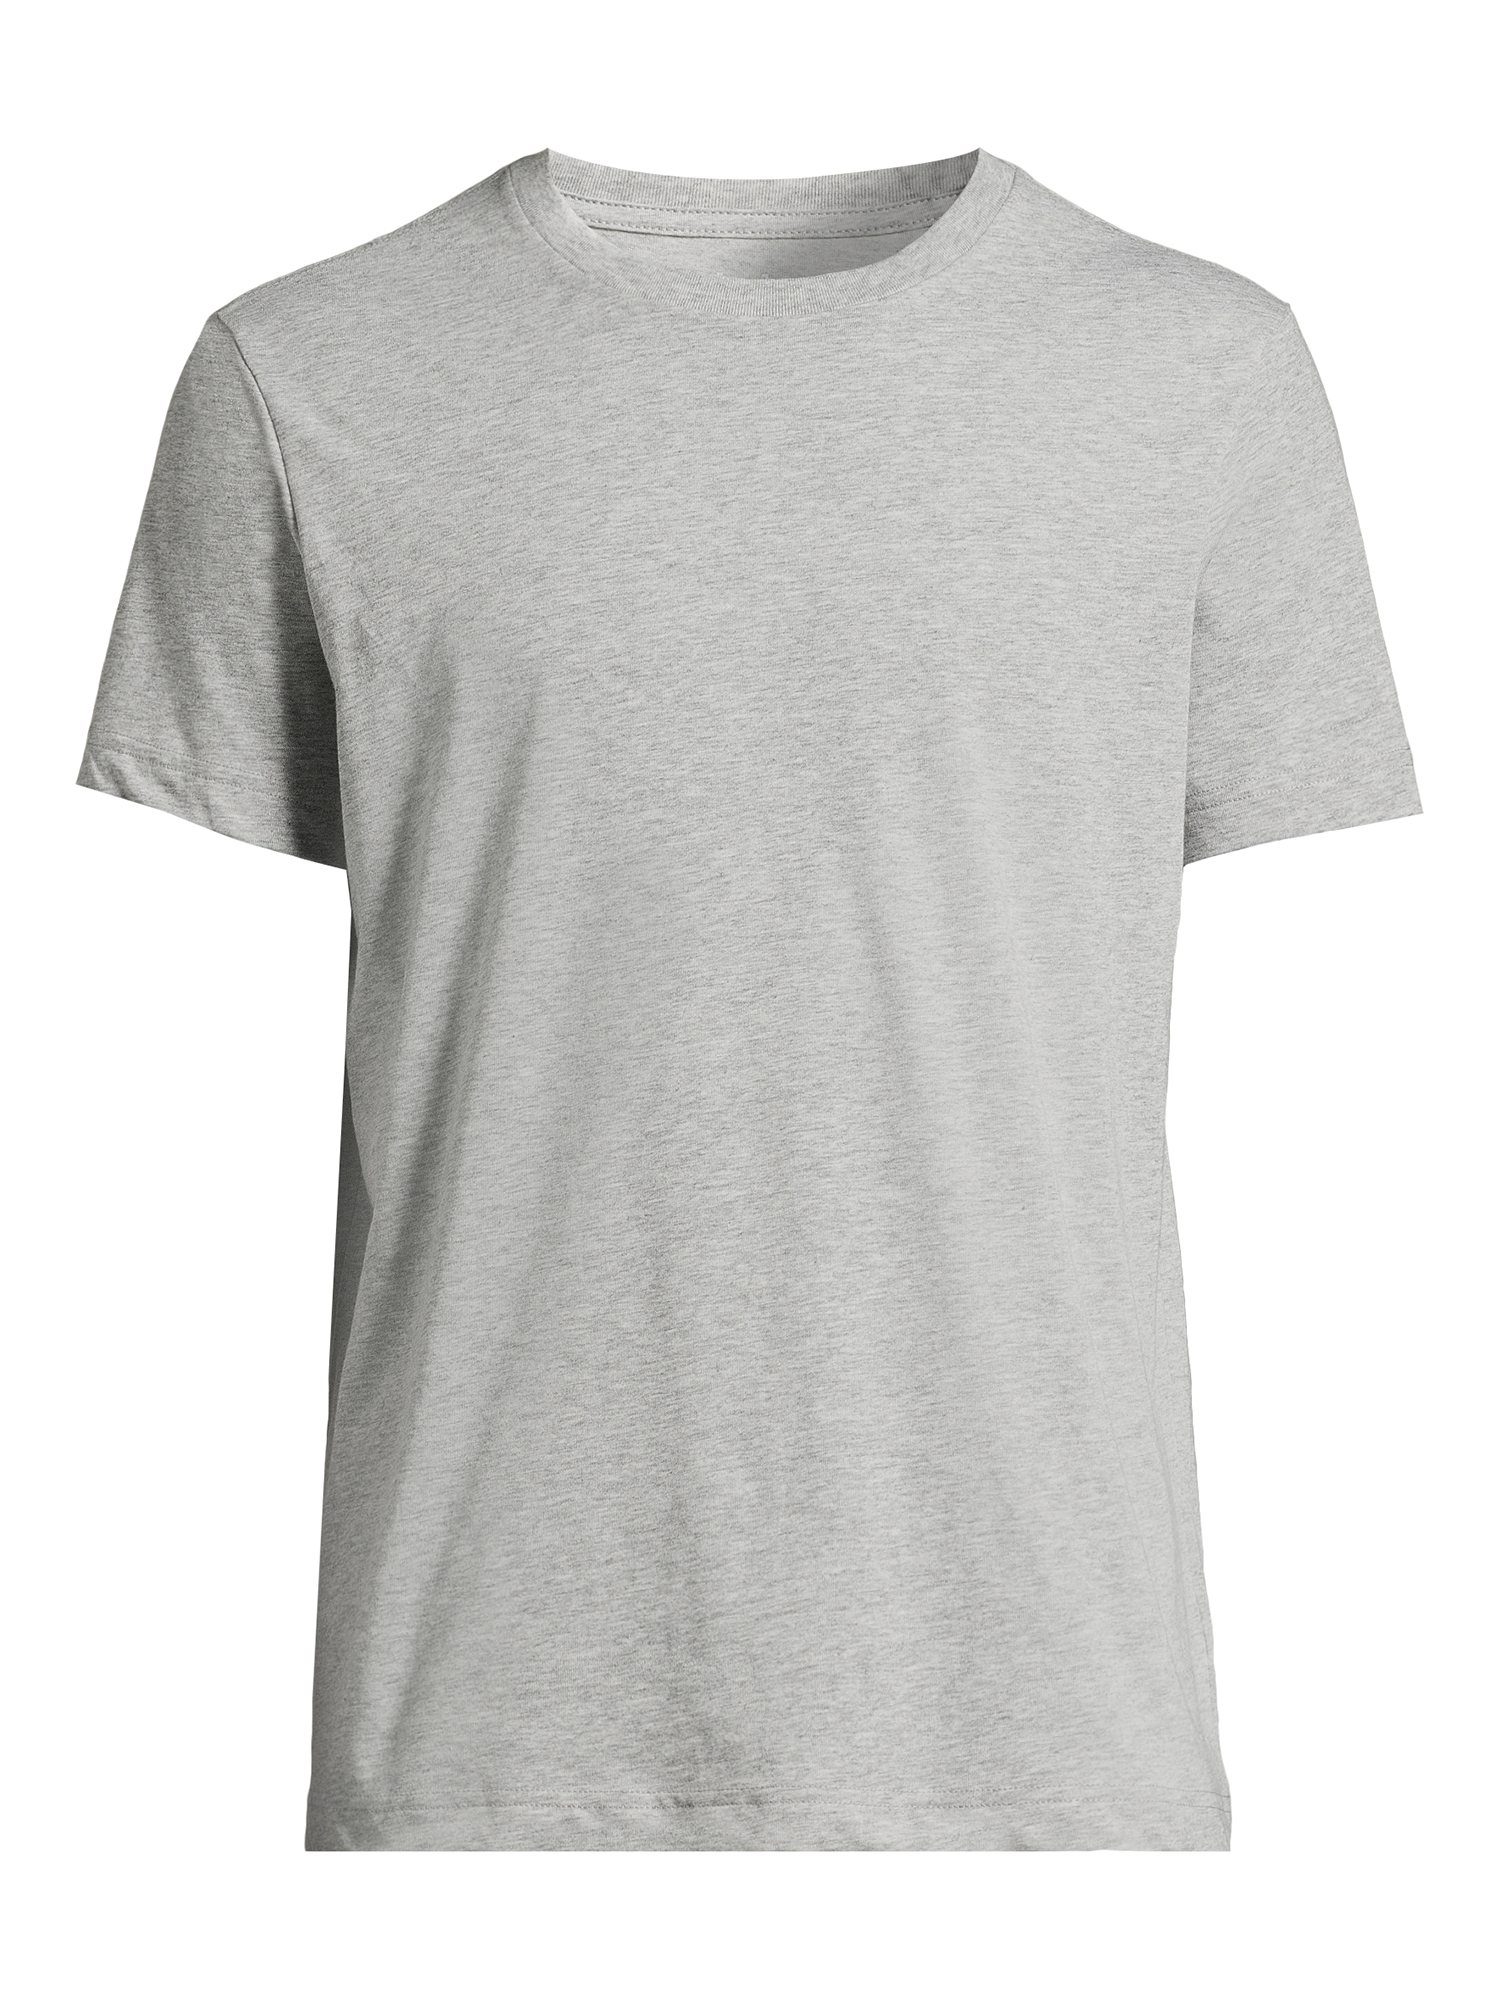 George Men's & Big Men's Crewneck Tee with Short Sleeves, Sizes XS-3XL - image 5 of 5